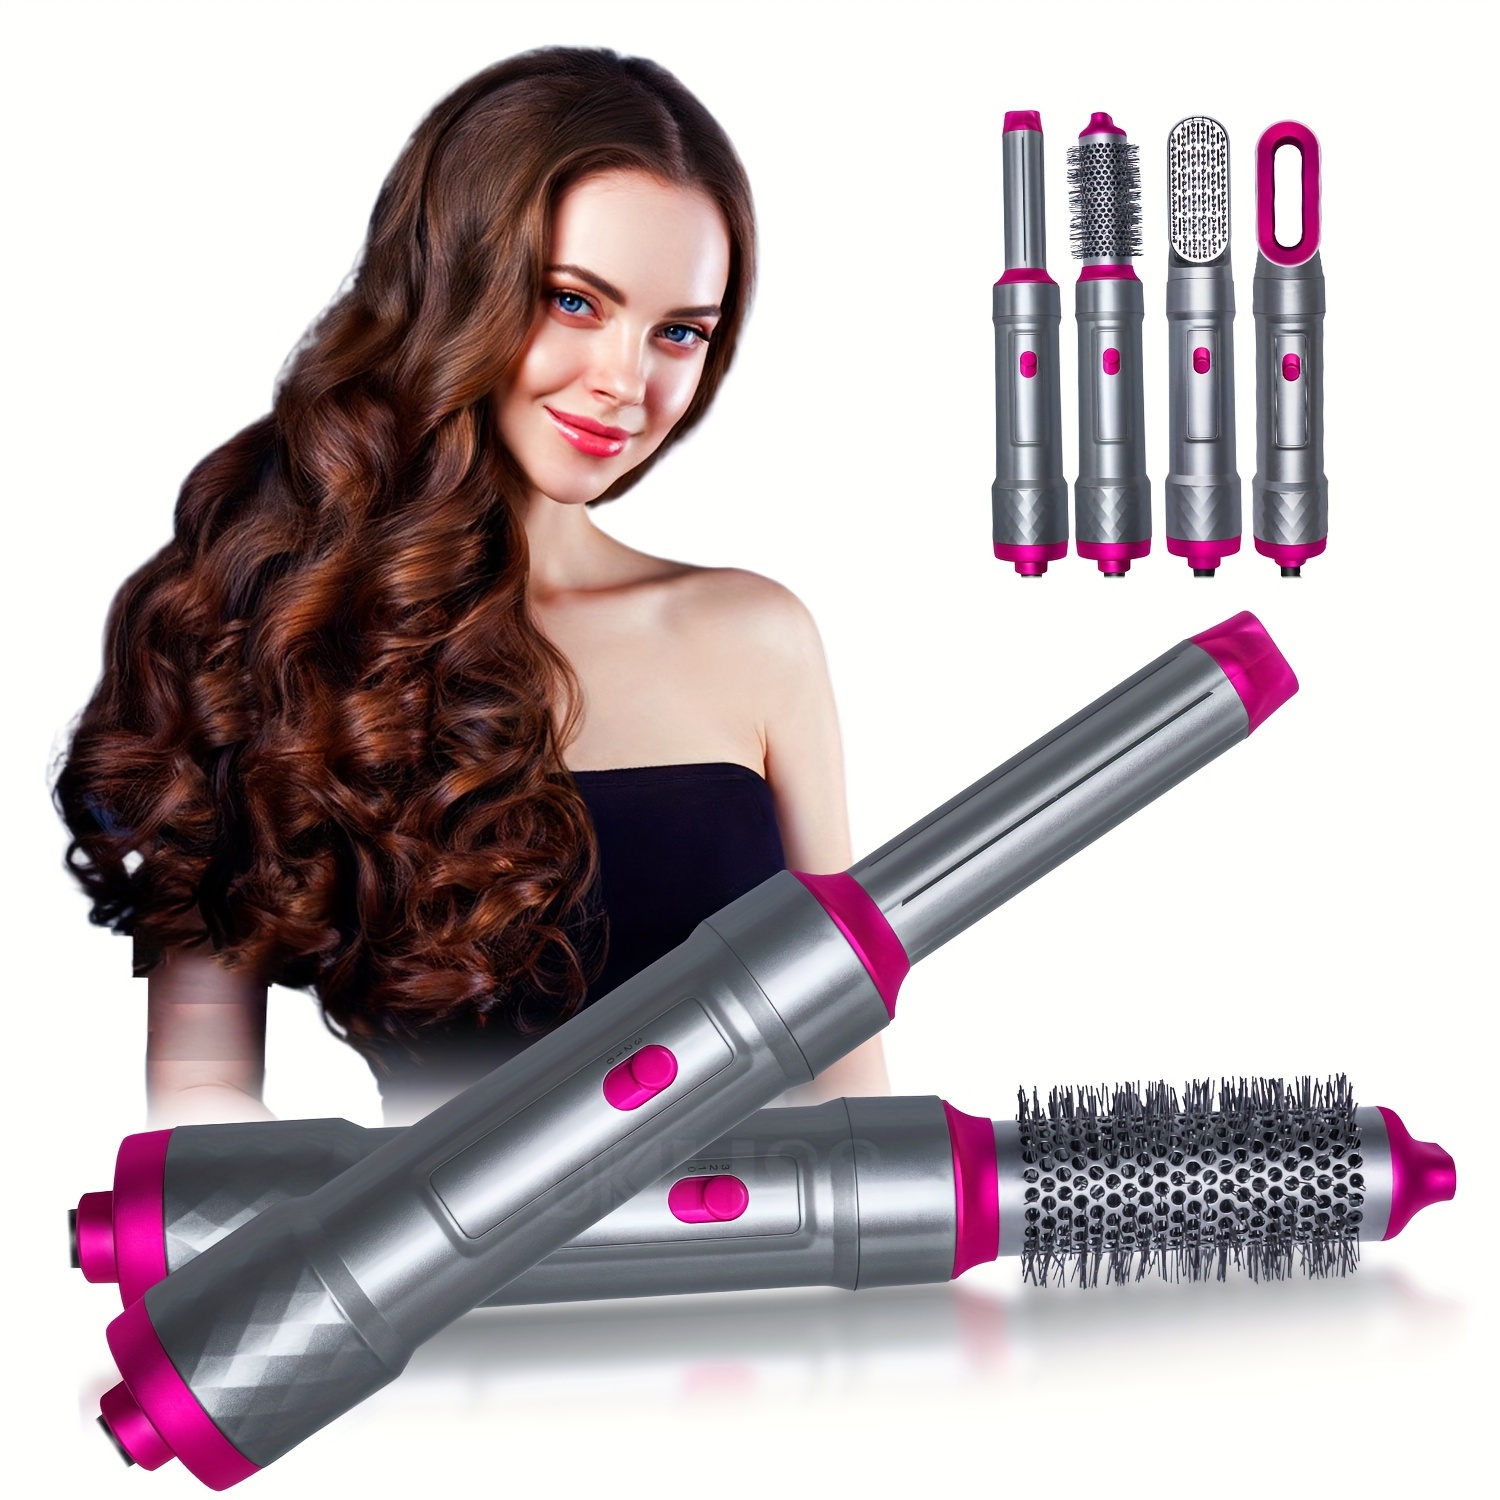 

5-in-1 Hot Air Styling Brush Set – Multi-functional Hair Dryer, Curler, Straightener, And Volumizer, Gifts For Women